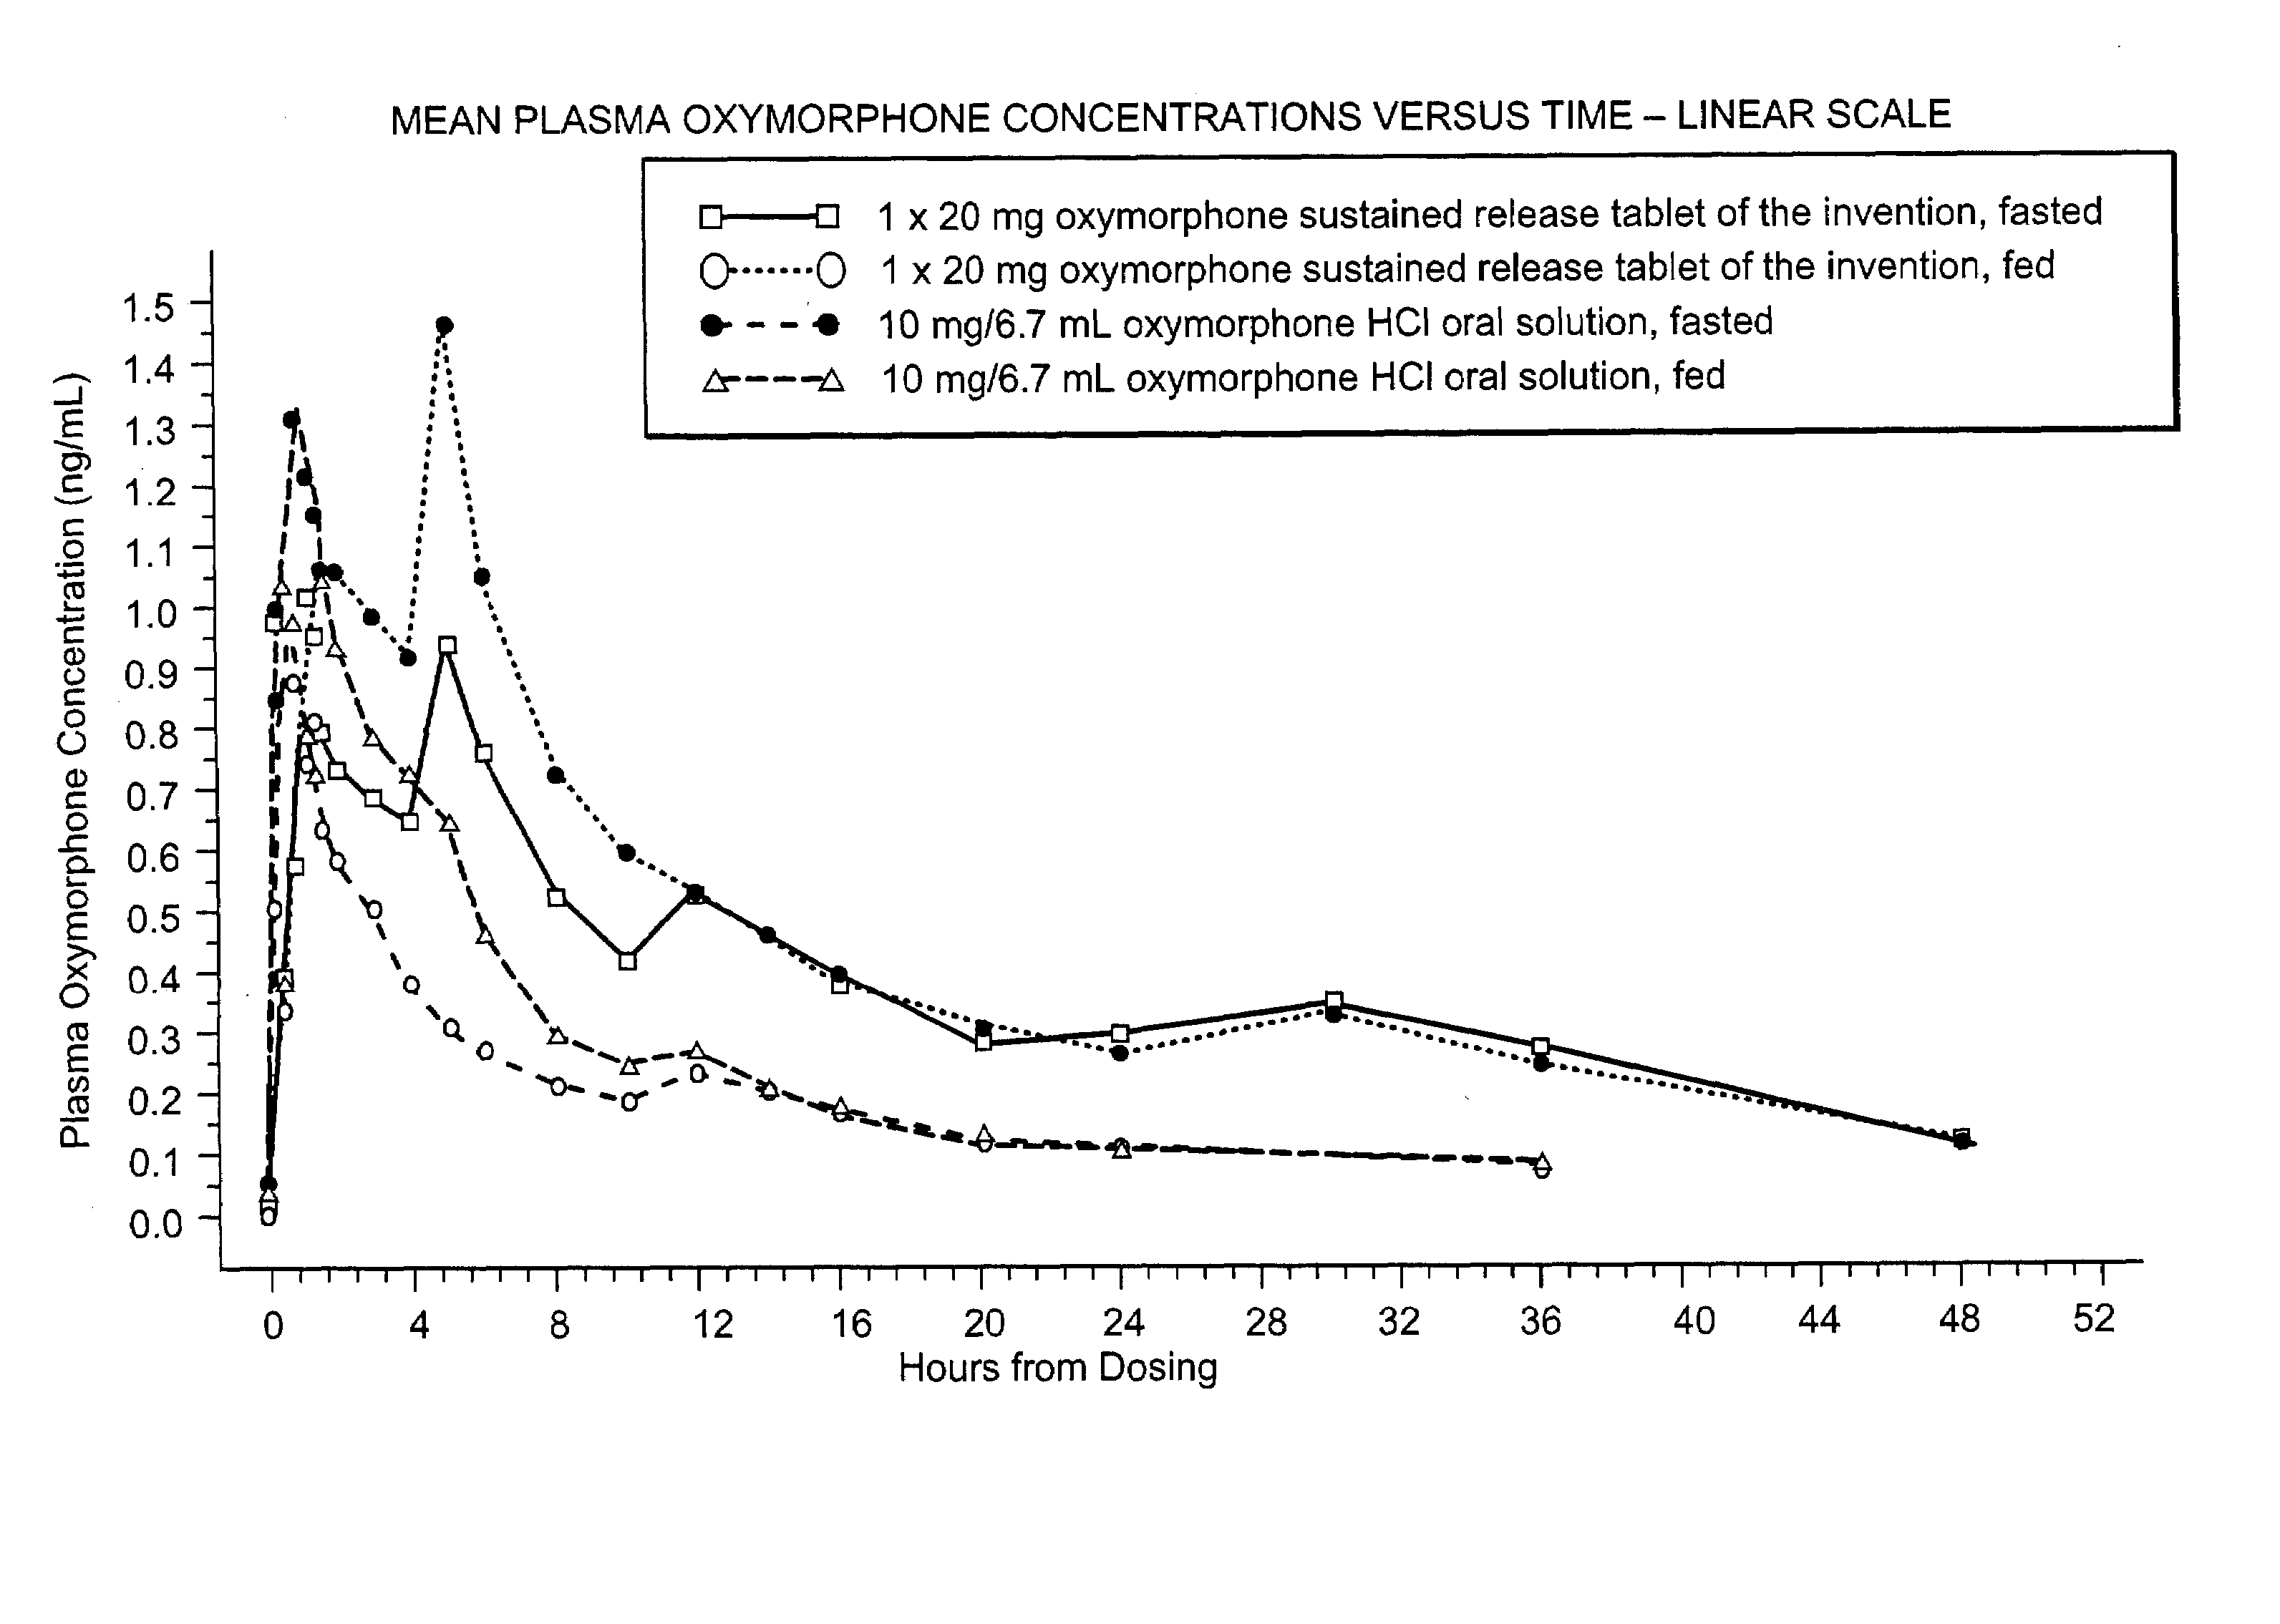 Sustained release formulations of oxymorphone